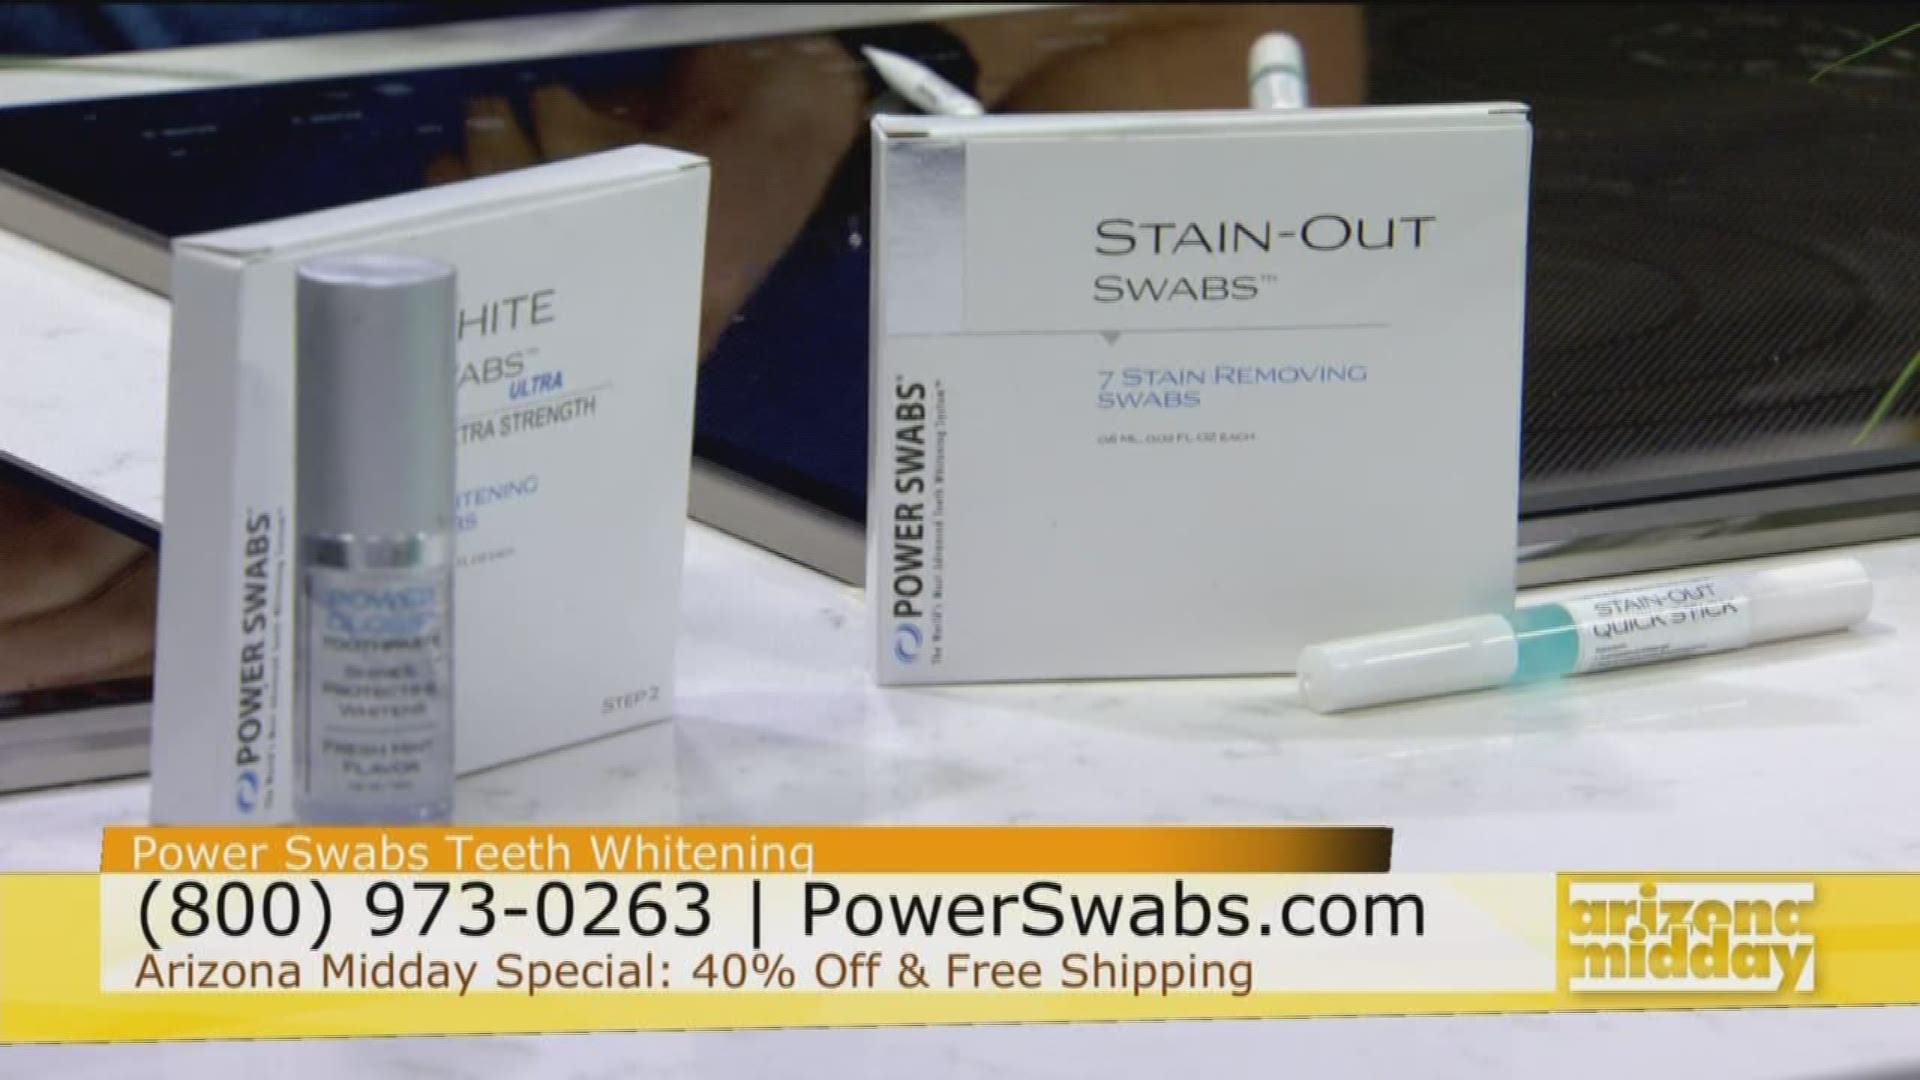 Lifestyle Expert, Scott DeFlaco, gives us the scoop on Power Swabs!